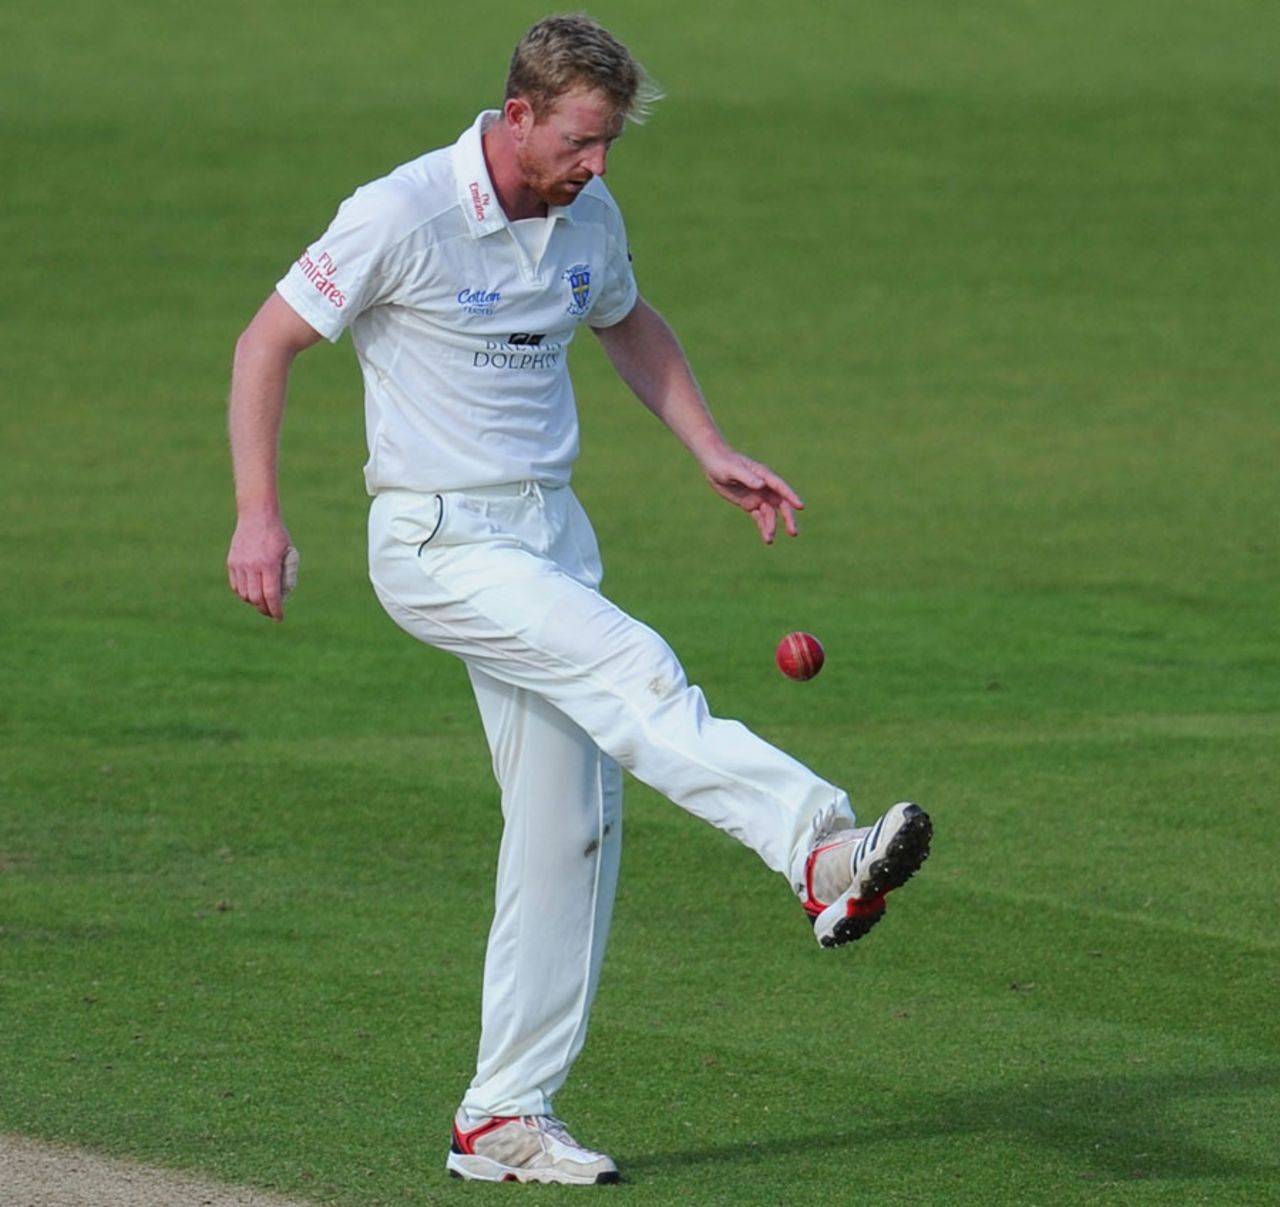 Paul Collingwood shows off his football skills, Durham v Nottinghamshire, County Championship, Division One, Chester-le-Street, September 18, 2013